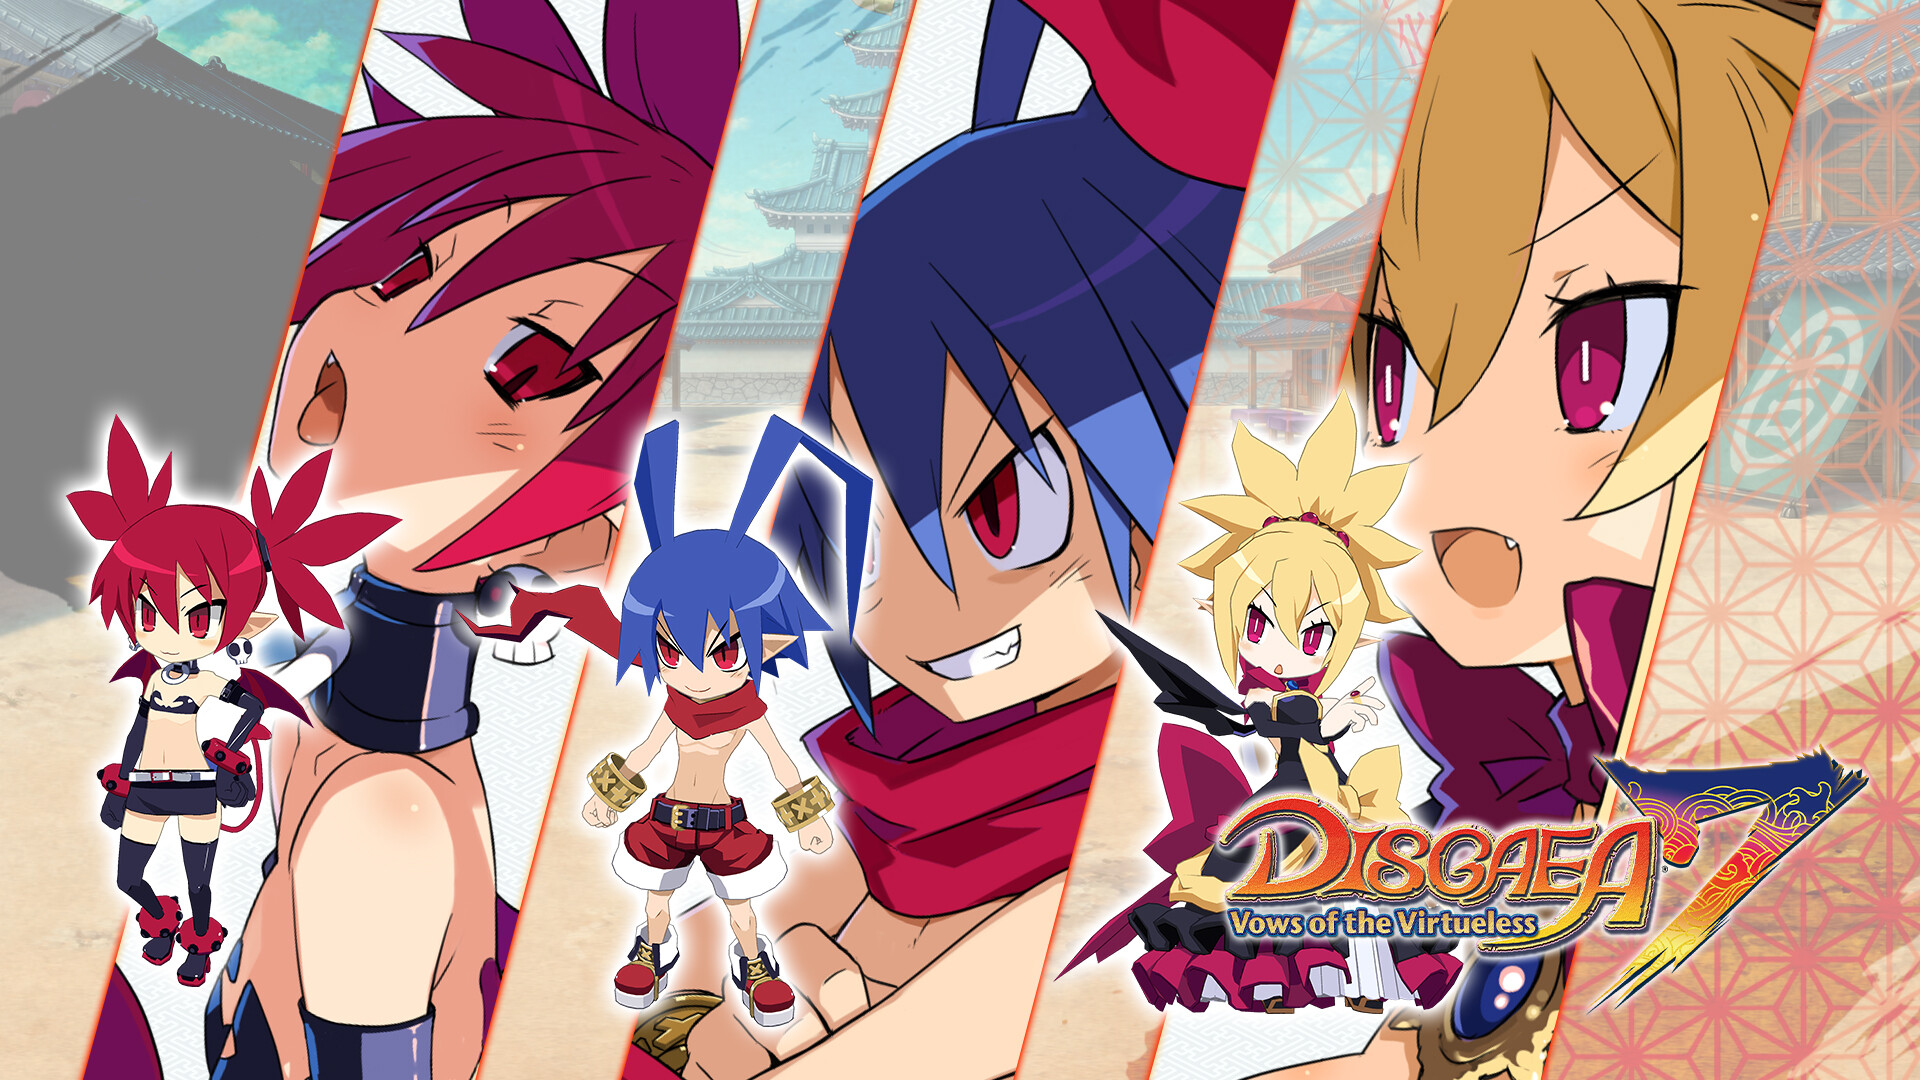 Disgaea 7: Vows of the Virtueless - Bonus Story: The Overlord, Demon Lord, and Sheltered Girl Featured Screenshot #1